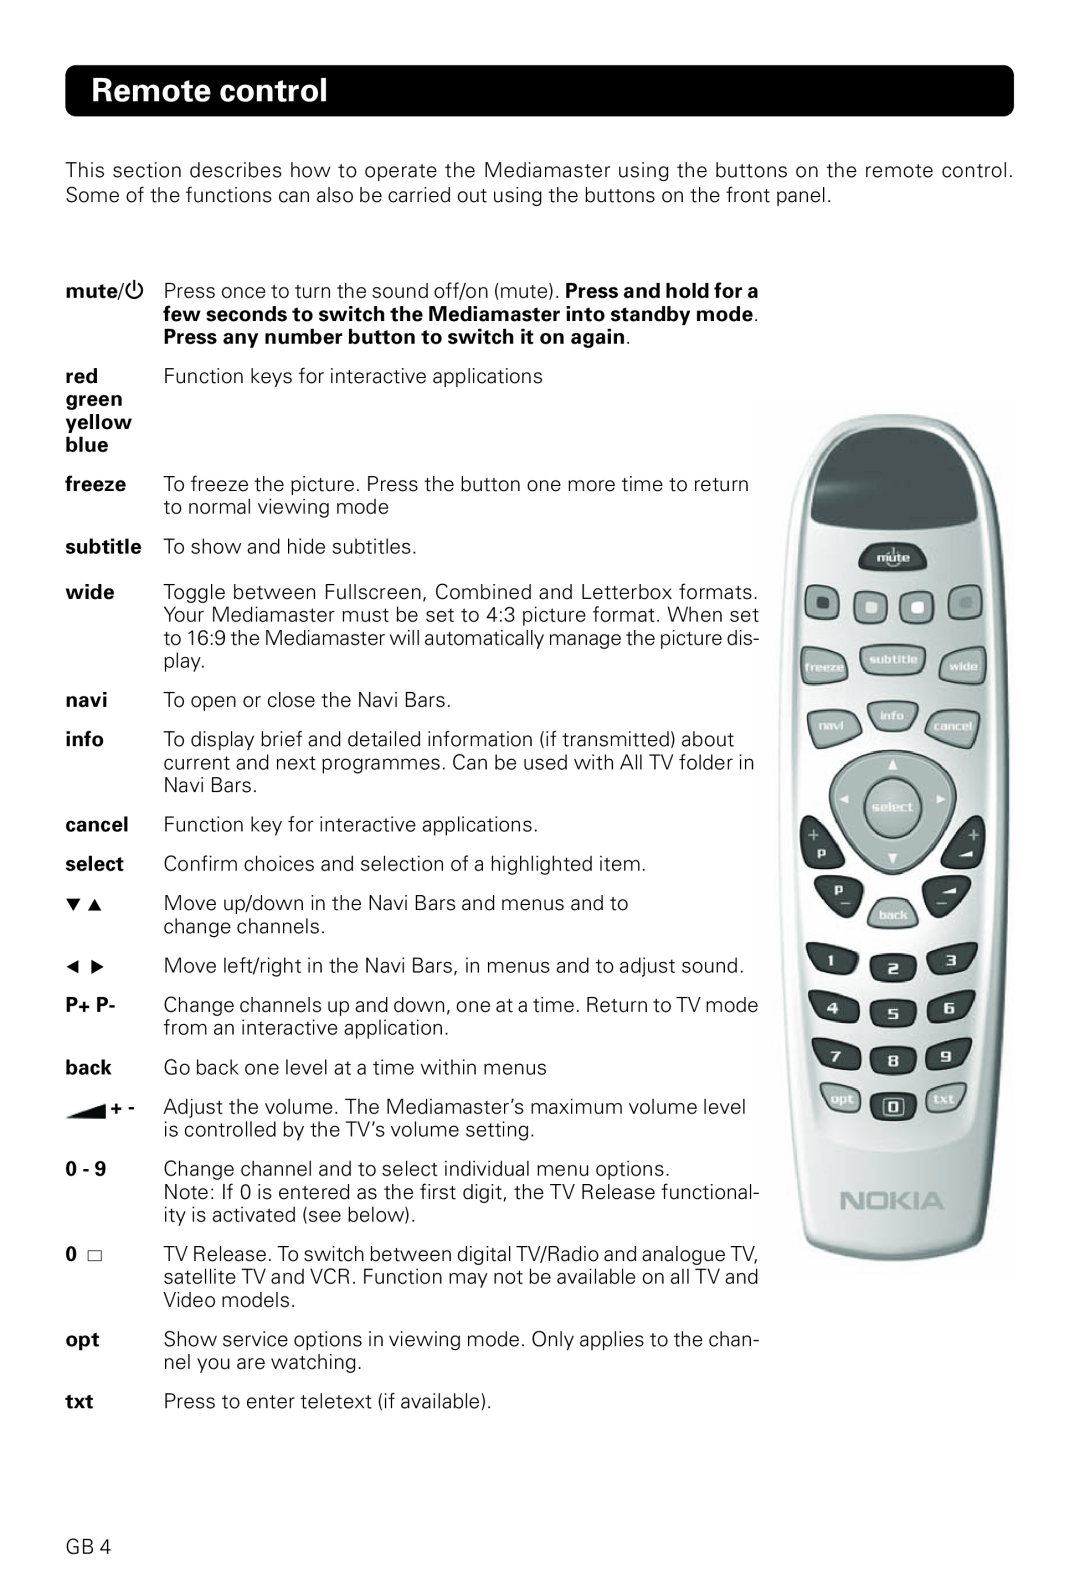 Nokia 221 T owner manual Remote control, yellow blue, Press to enter teletext if available 